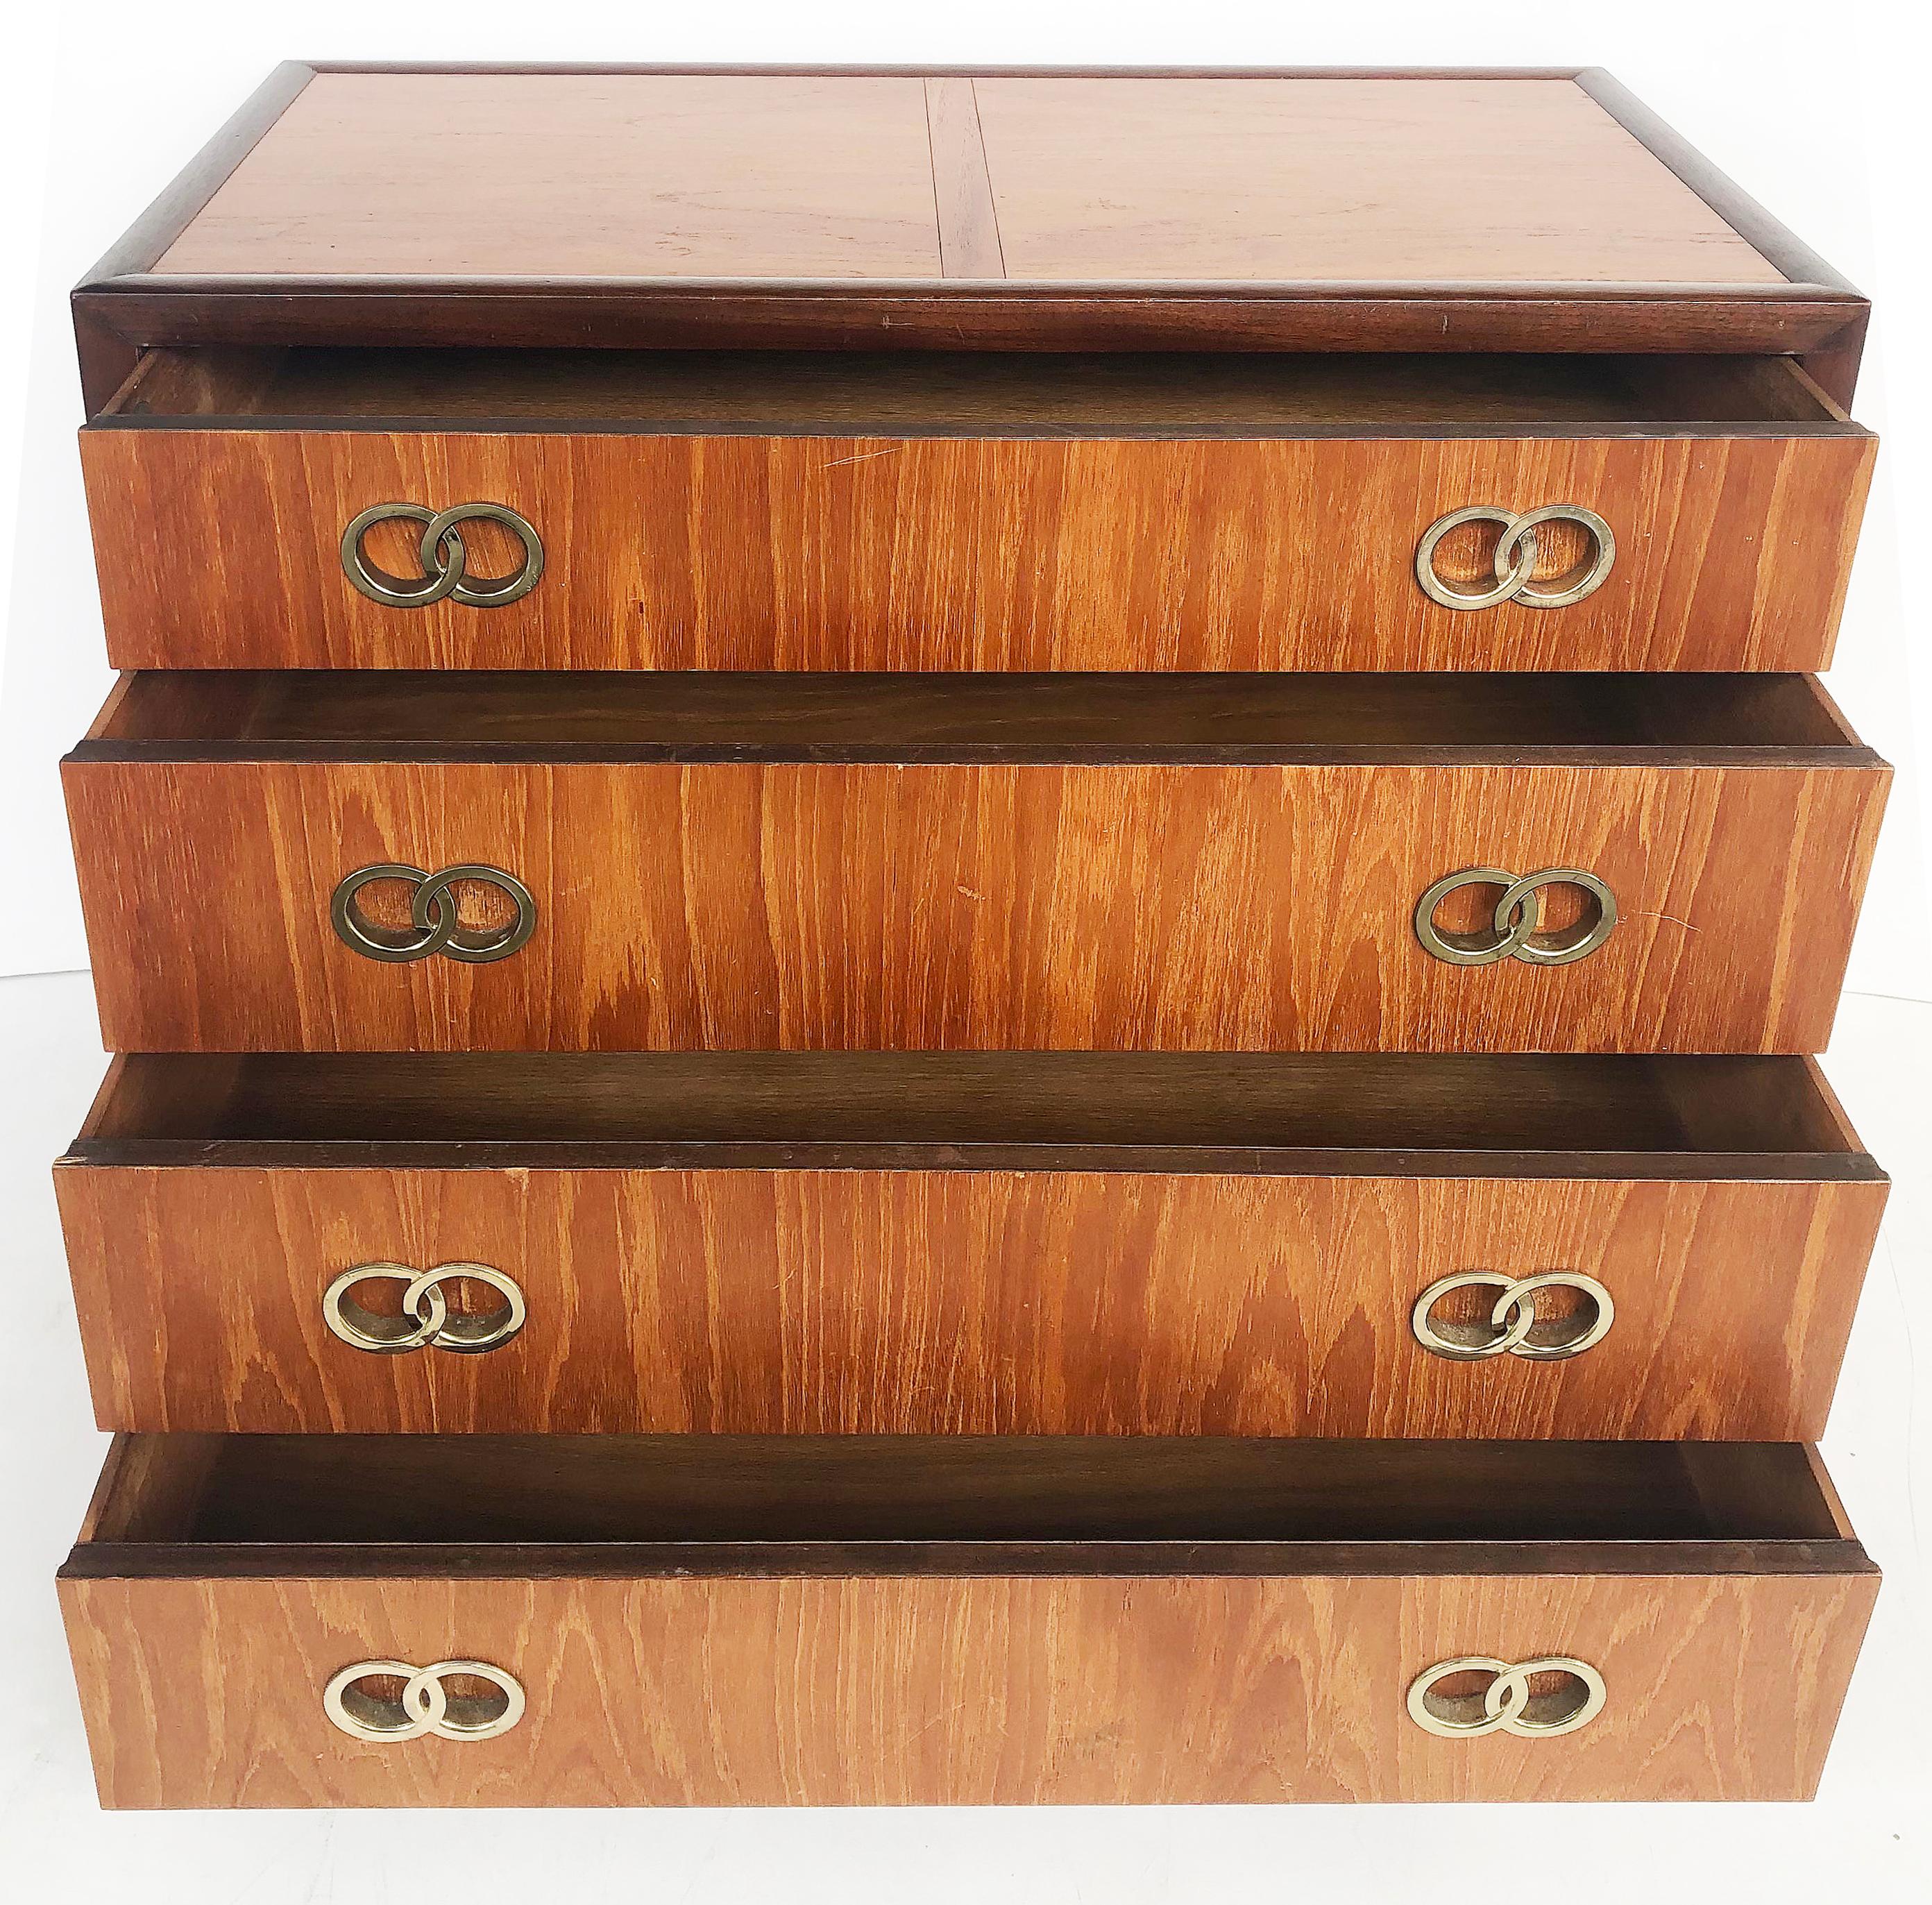 American Michael Taylor Baker 4 Drawer Chests with Brass Ring Hardware, a Pair